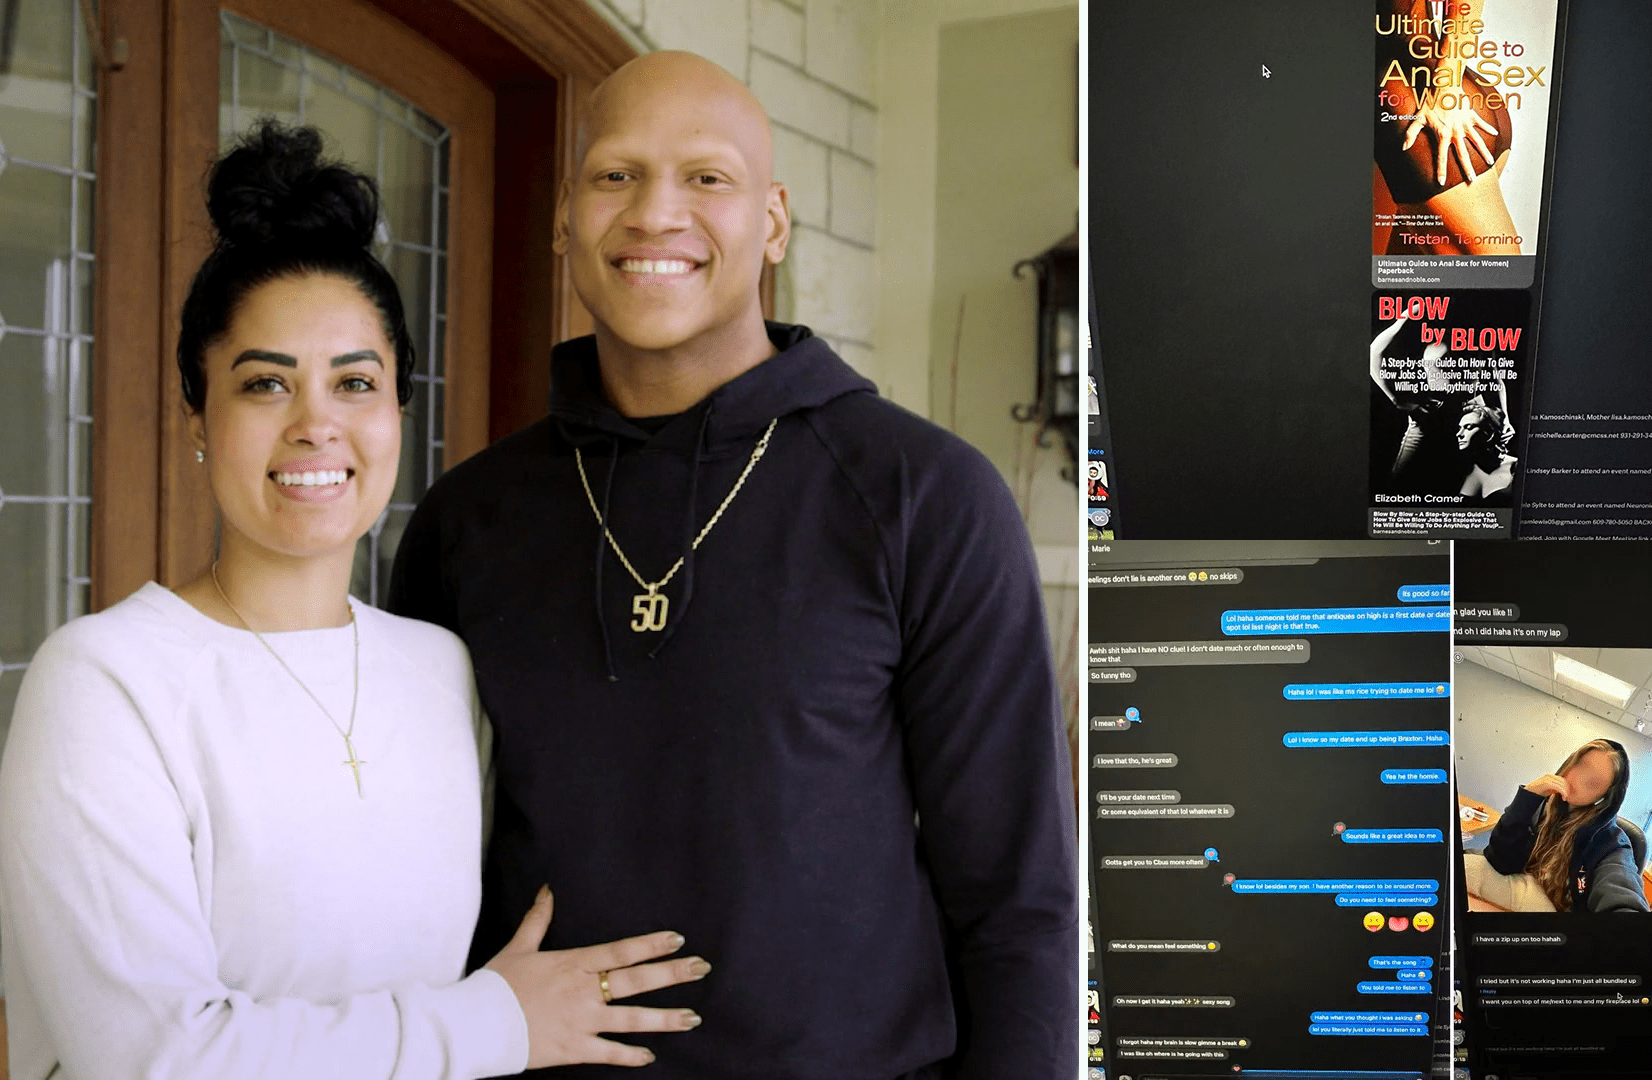 Former NFL Star Ryan Shazier Accused of Cheating, Wife Exposes Texts He Allegedly Sent Mistress — Including Links to Anal and Oral Sex Guides [Photos]